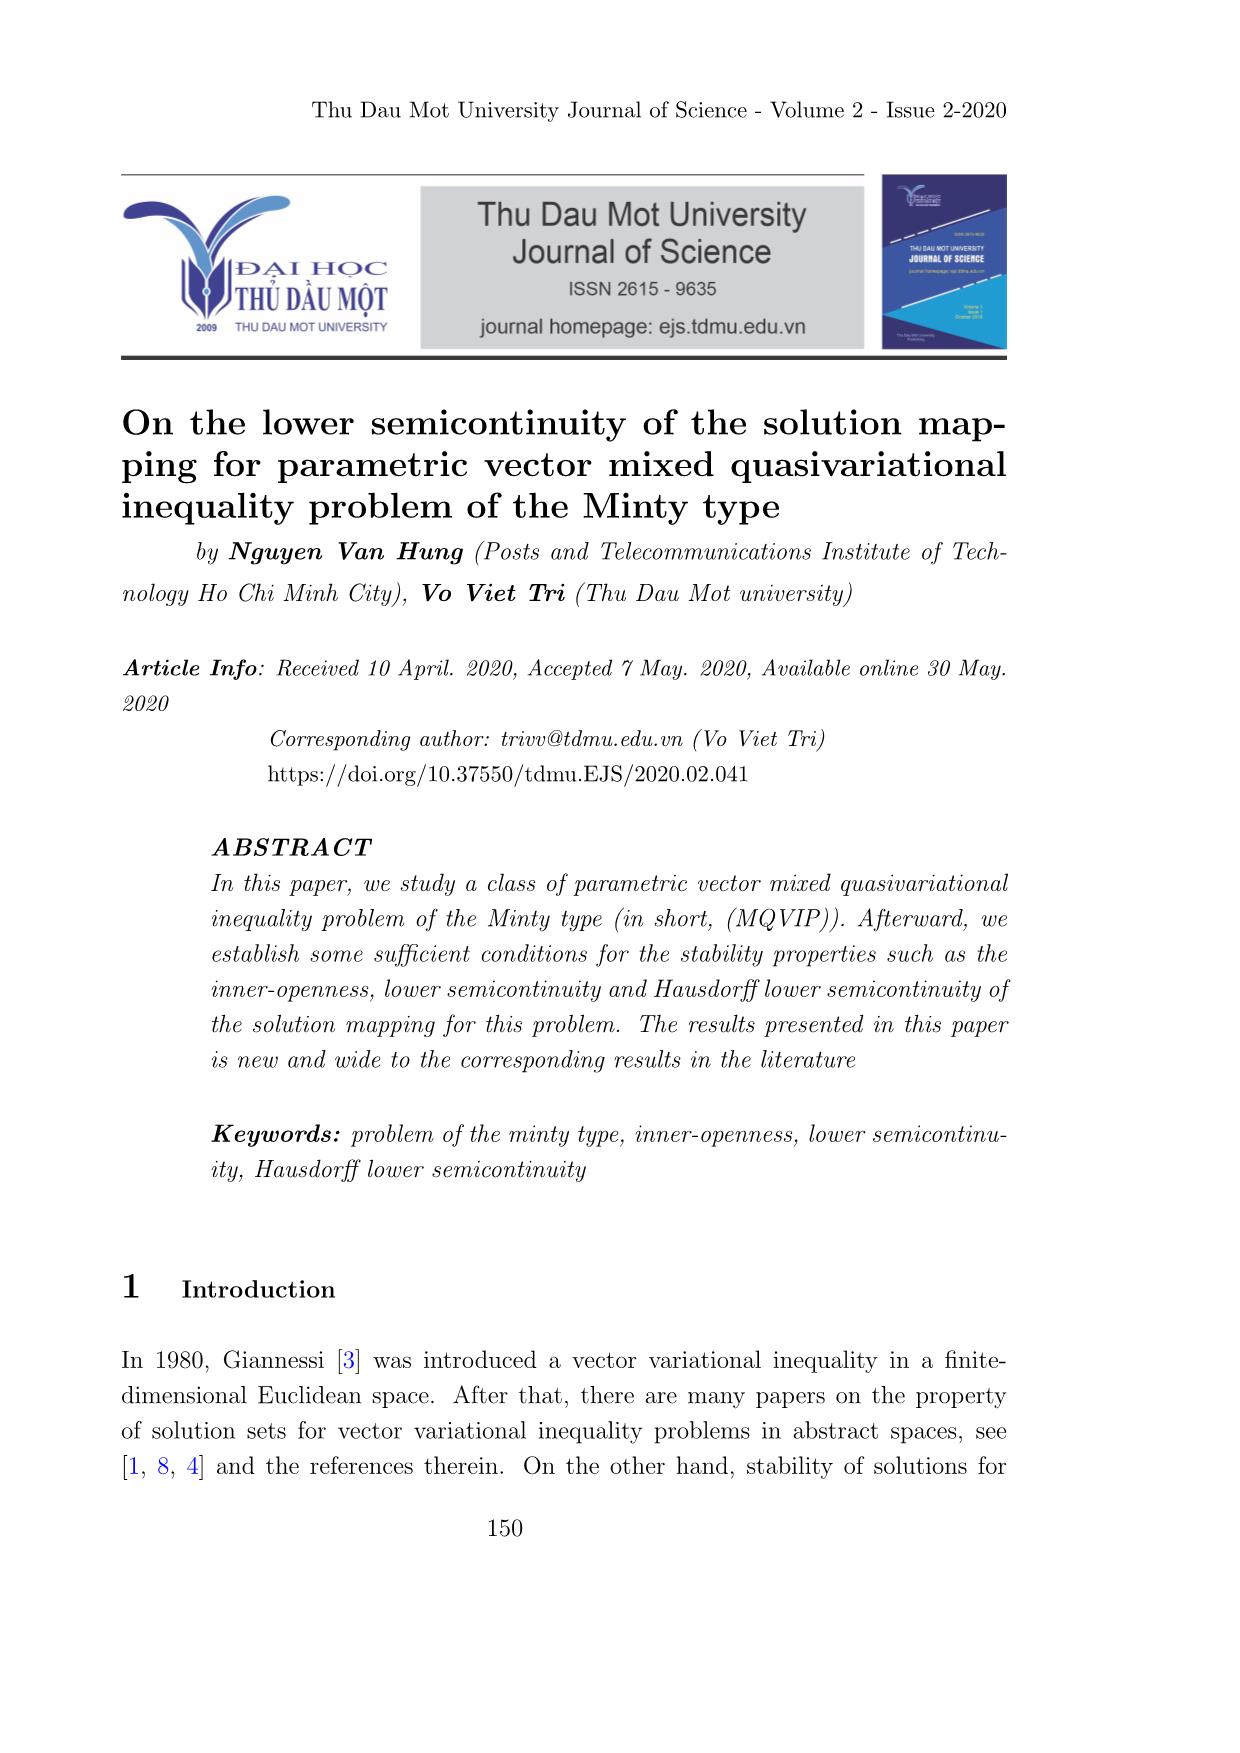 On the lower semicontinuity of the solution mapping for parametric vector mixed quasivariational inequality problem of the Minty type trang 1